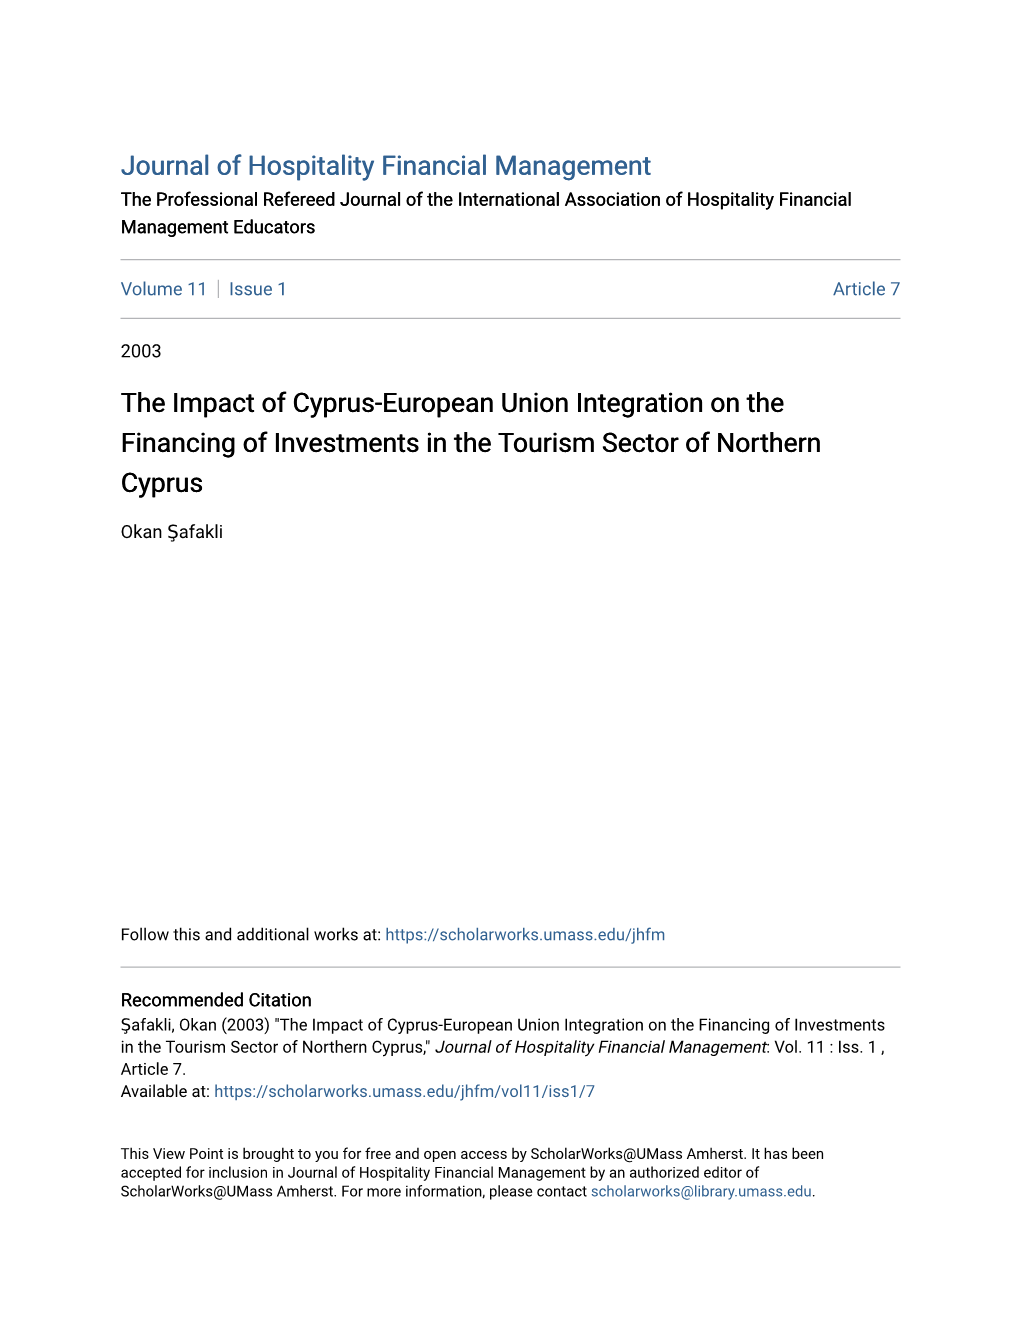 The Impact of Cyprus-European Union Integration on the Financing of Investments in the Tourism Sector of Northern Cyprus